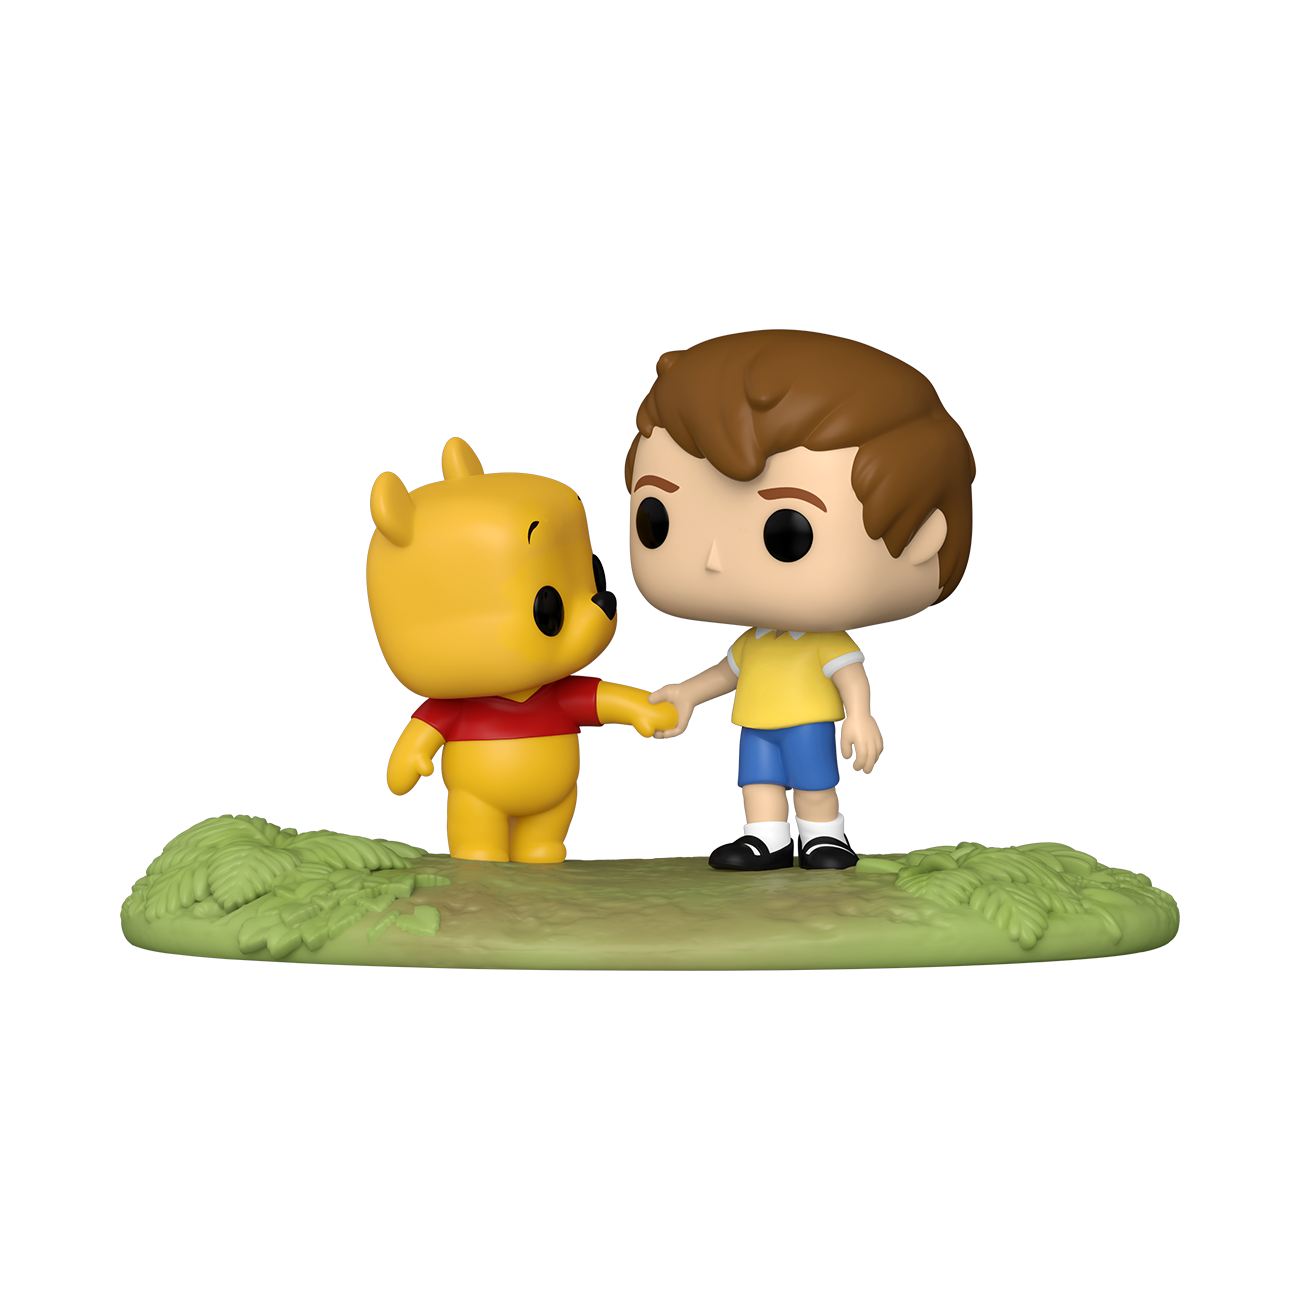 Photos - Action Figures / Transformers Funko POP! MOMENT Christopher Robin With Pooh - Winnie The Pooh 